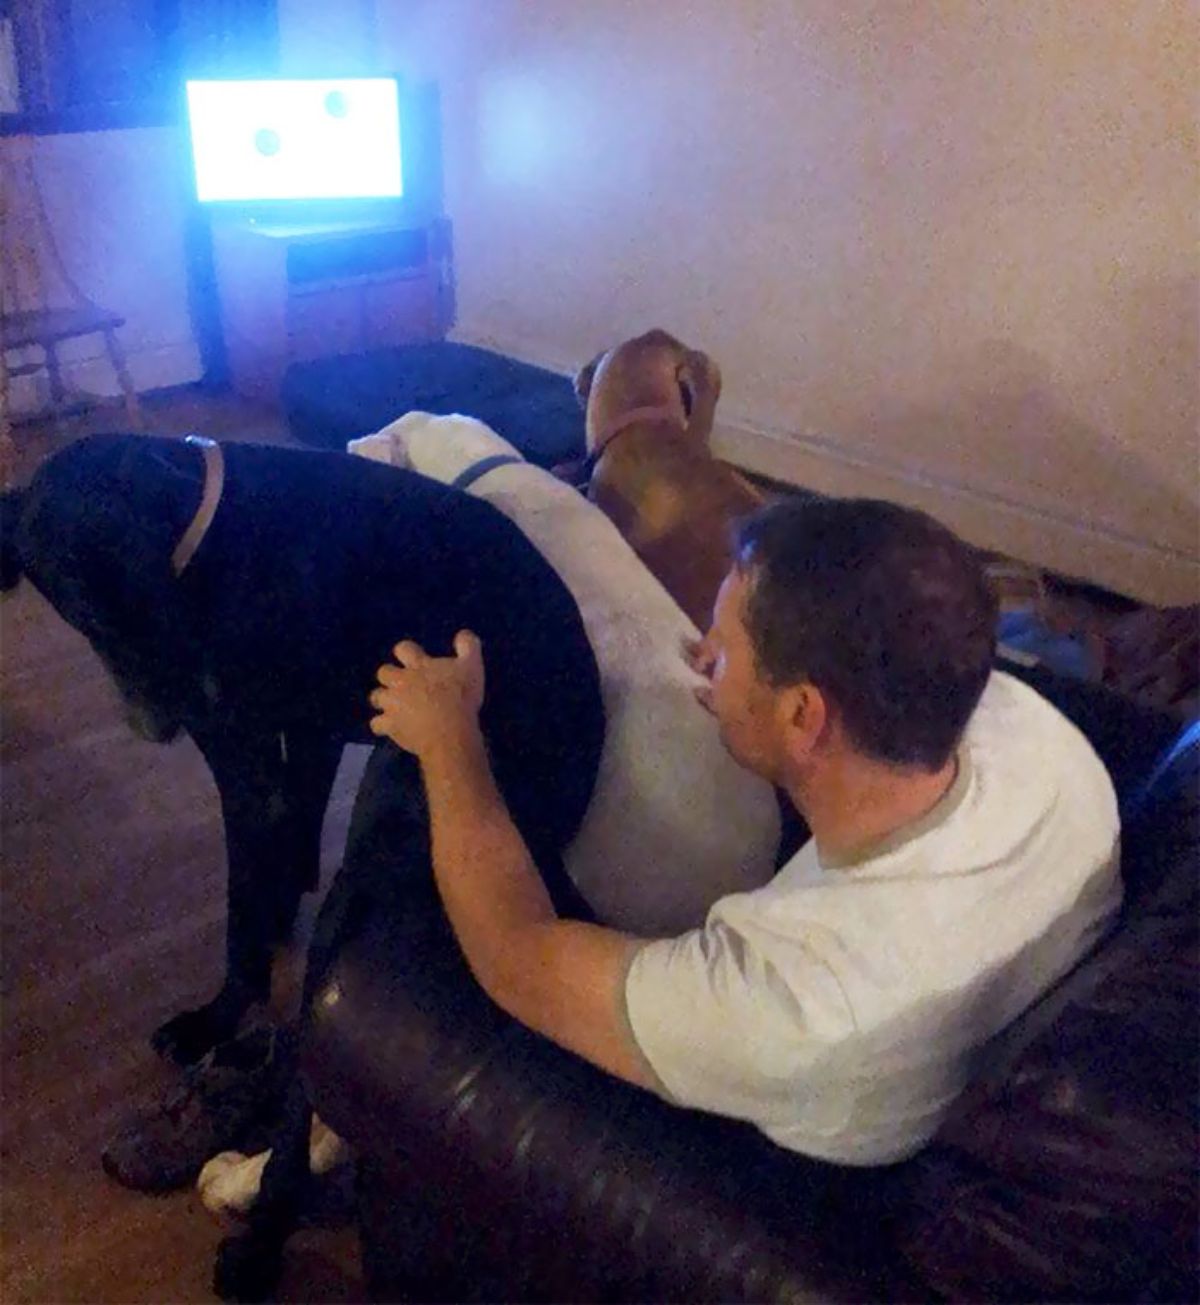 3 great danes, black, white and brown, are sitting on a man's lap and the man is watching television